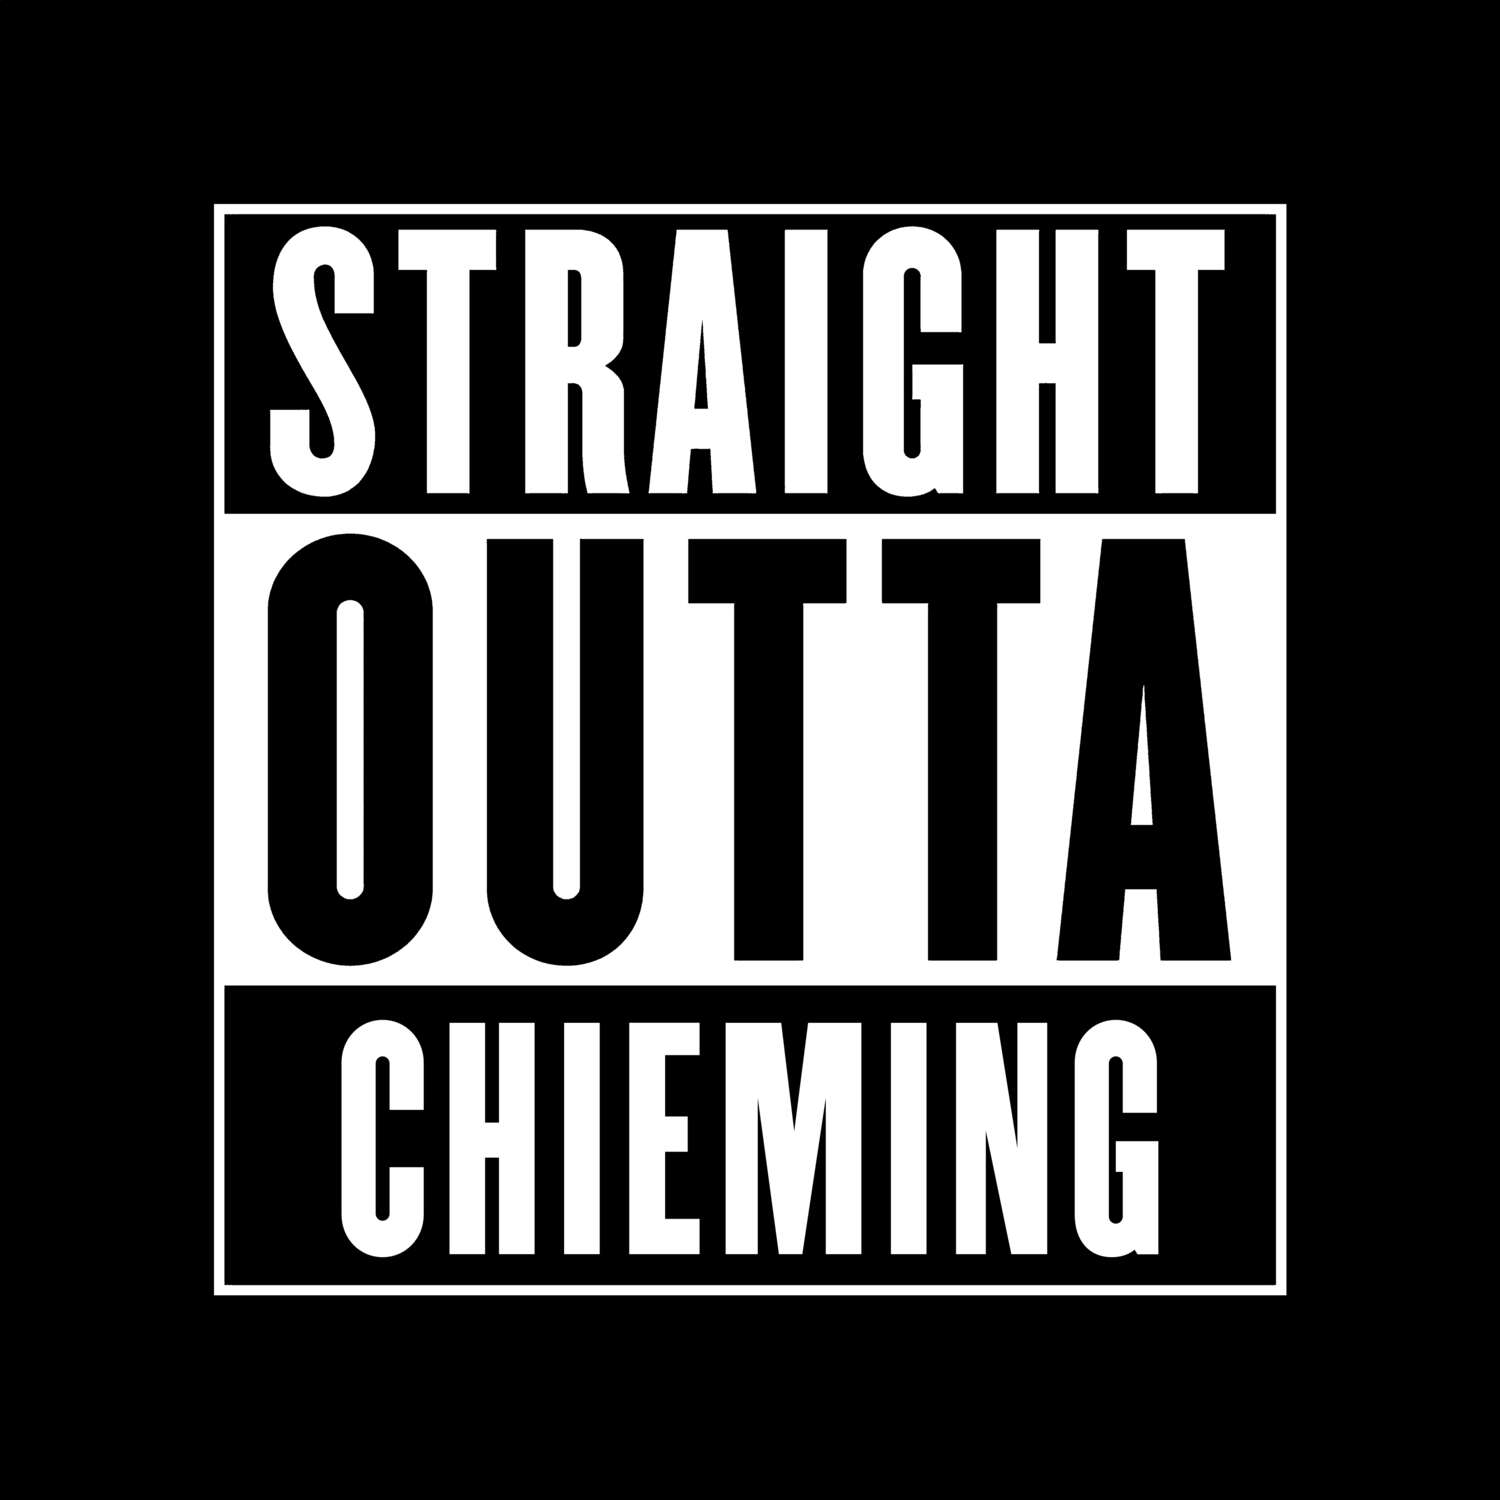 Chieming T-Shirt »Straight Outta«